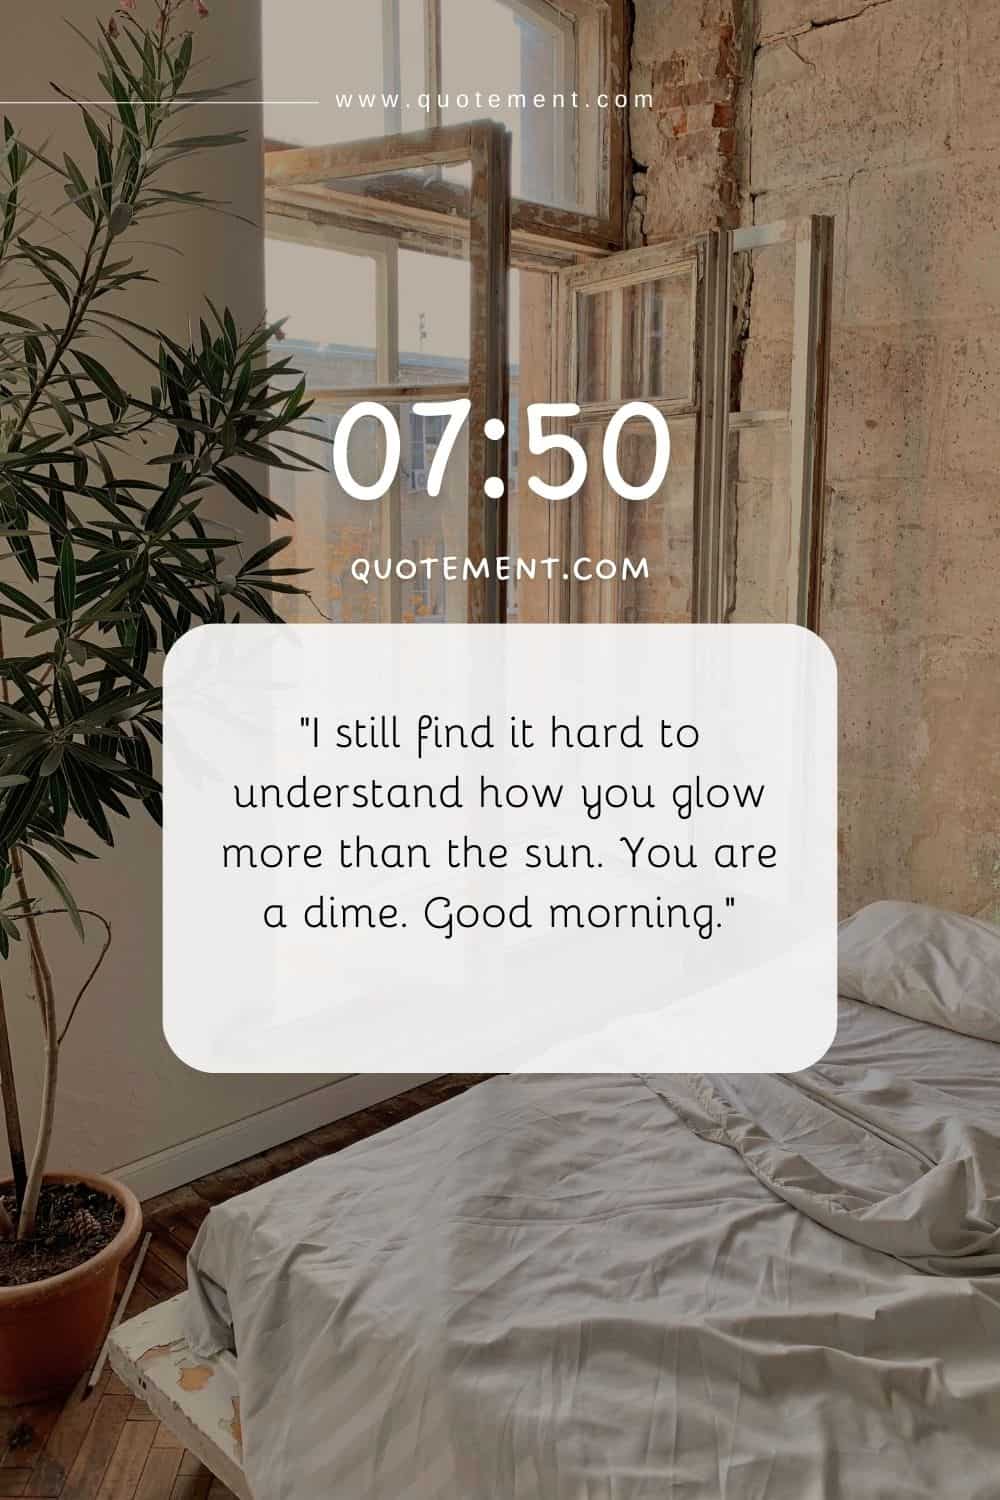 message over a phone screen displaying a tranquil bedroom